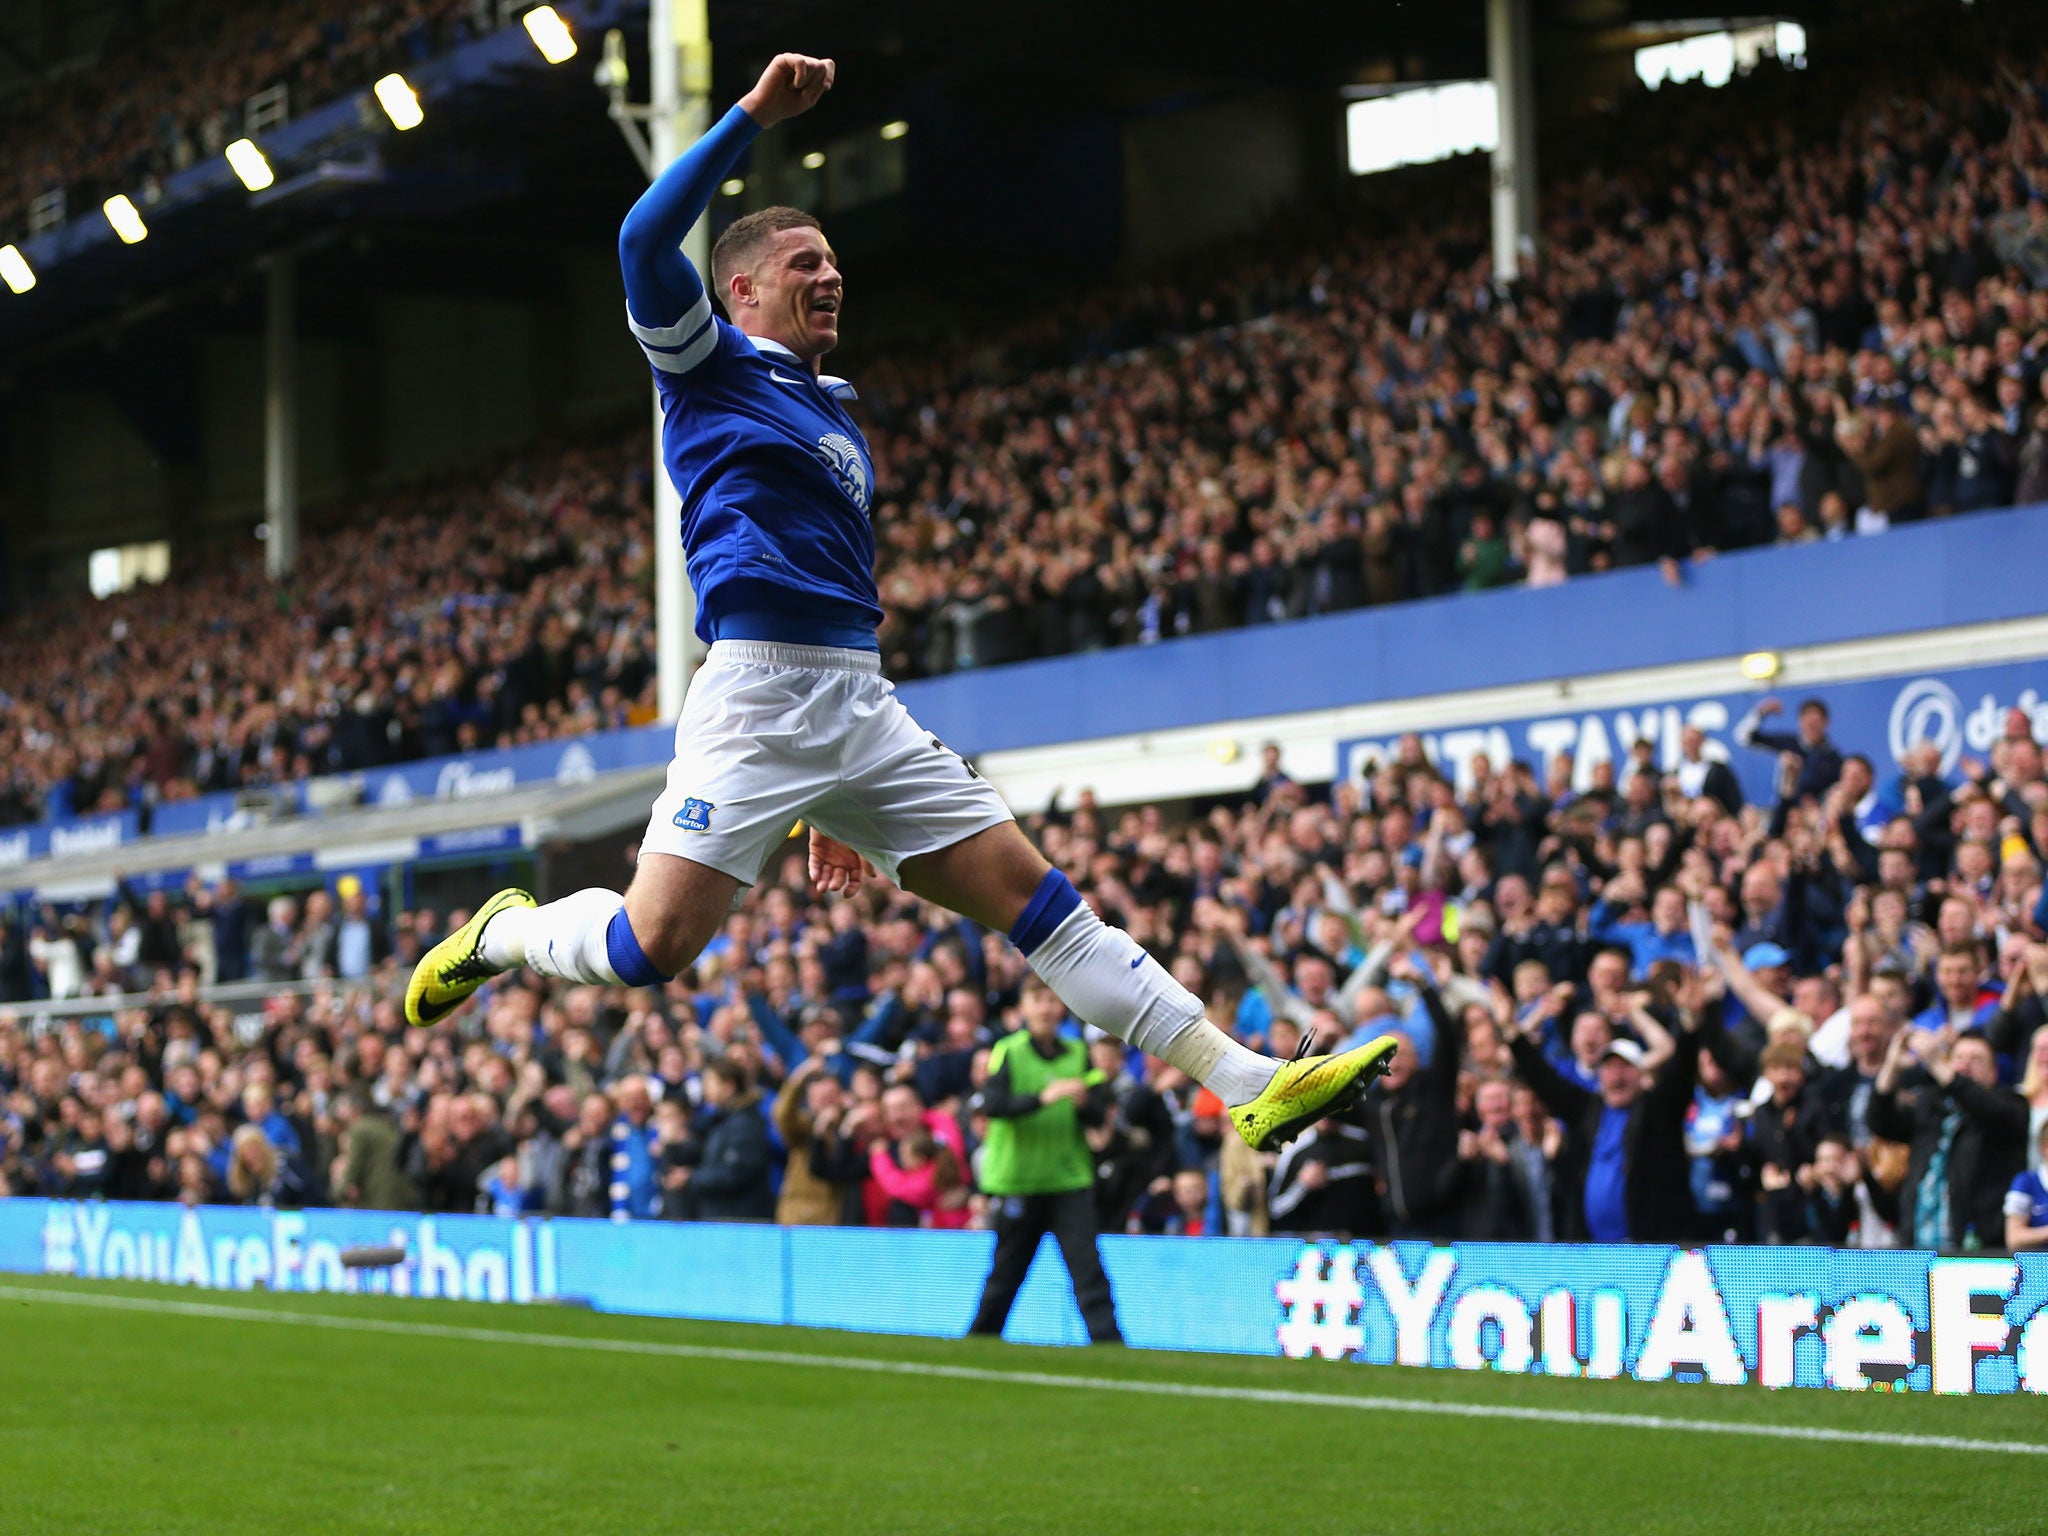 Ross Barkley is likely to be talked about a lot in this summer's transfer window